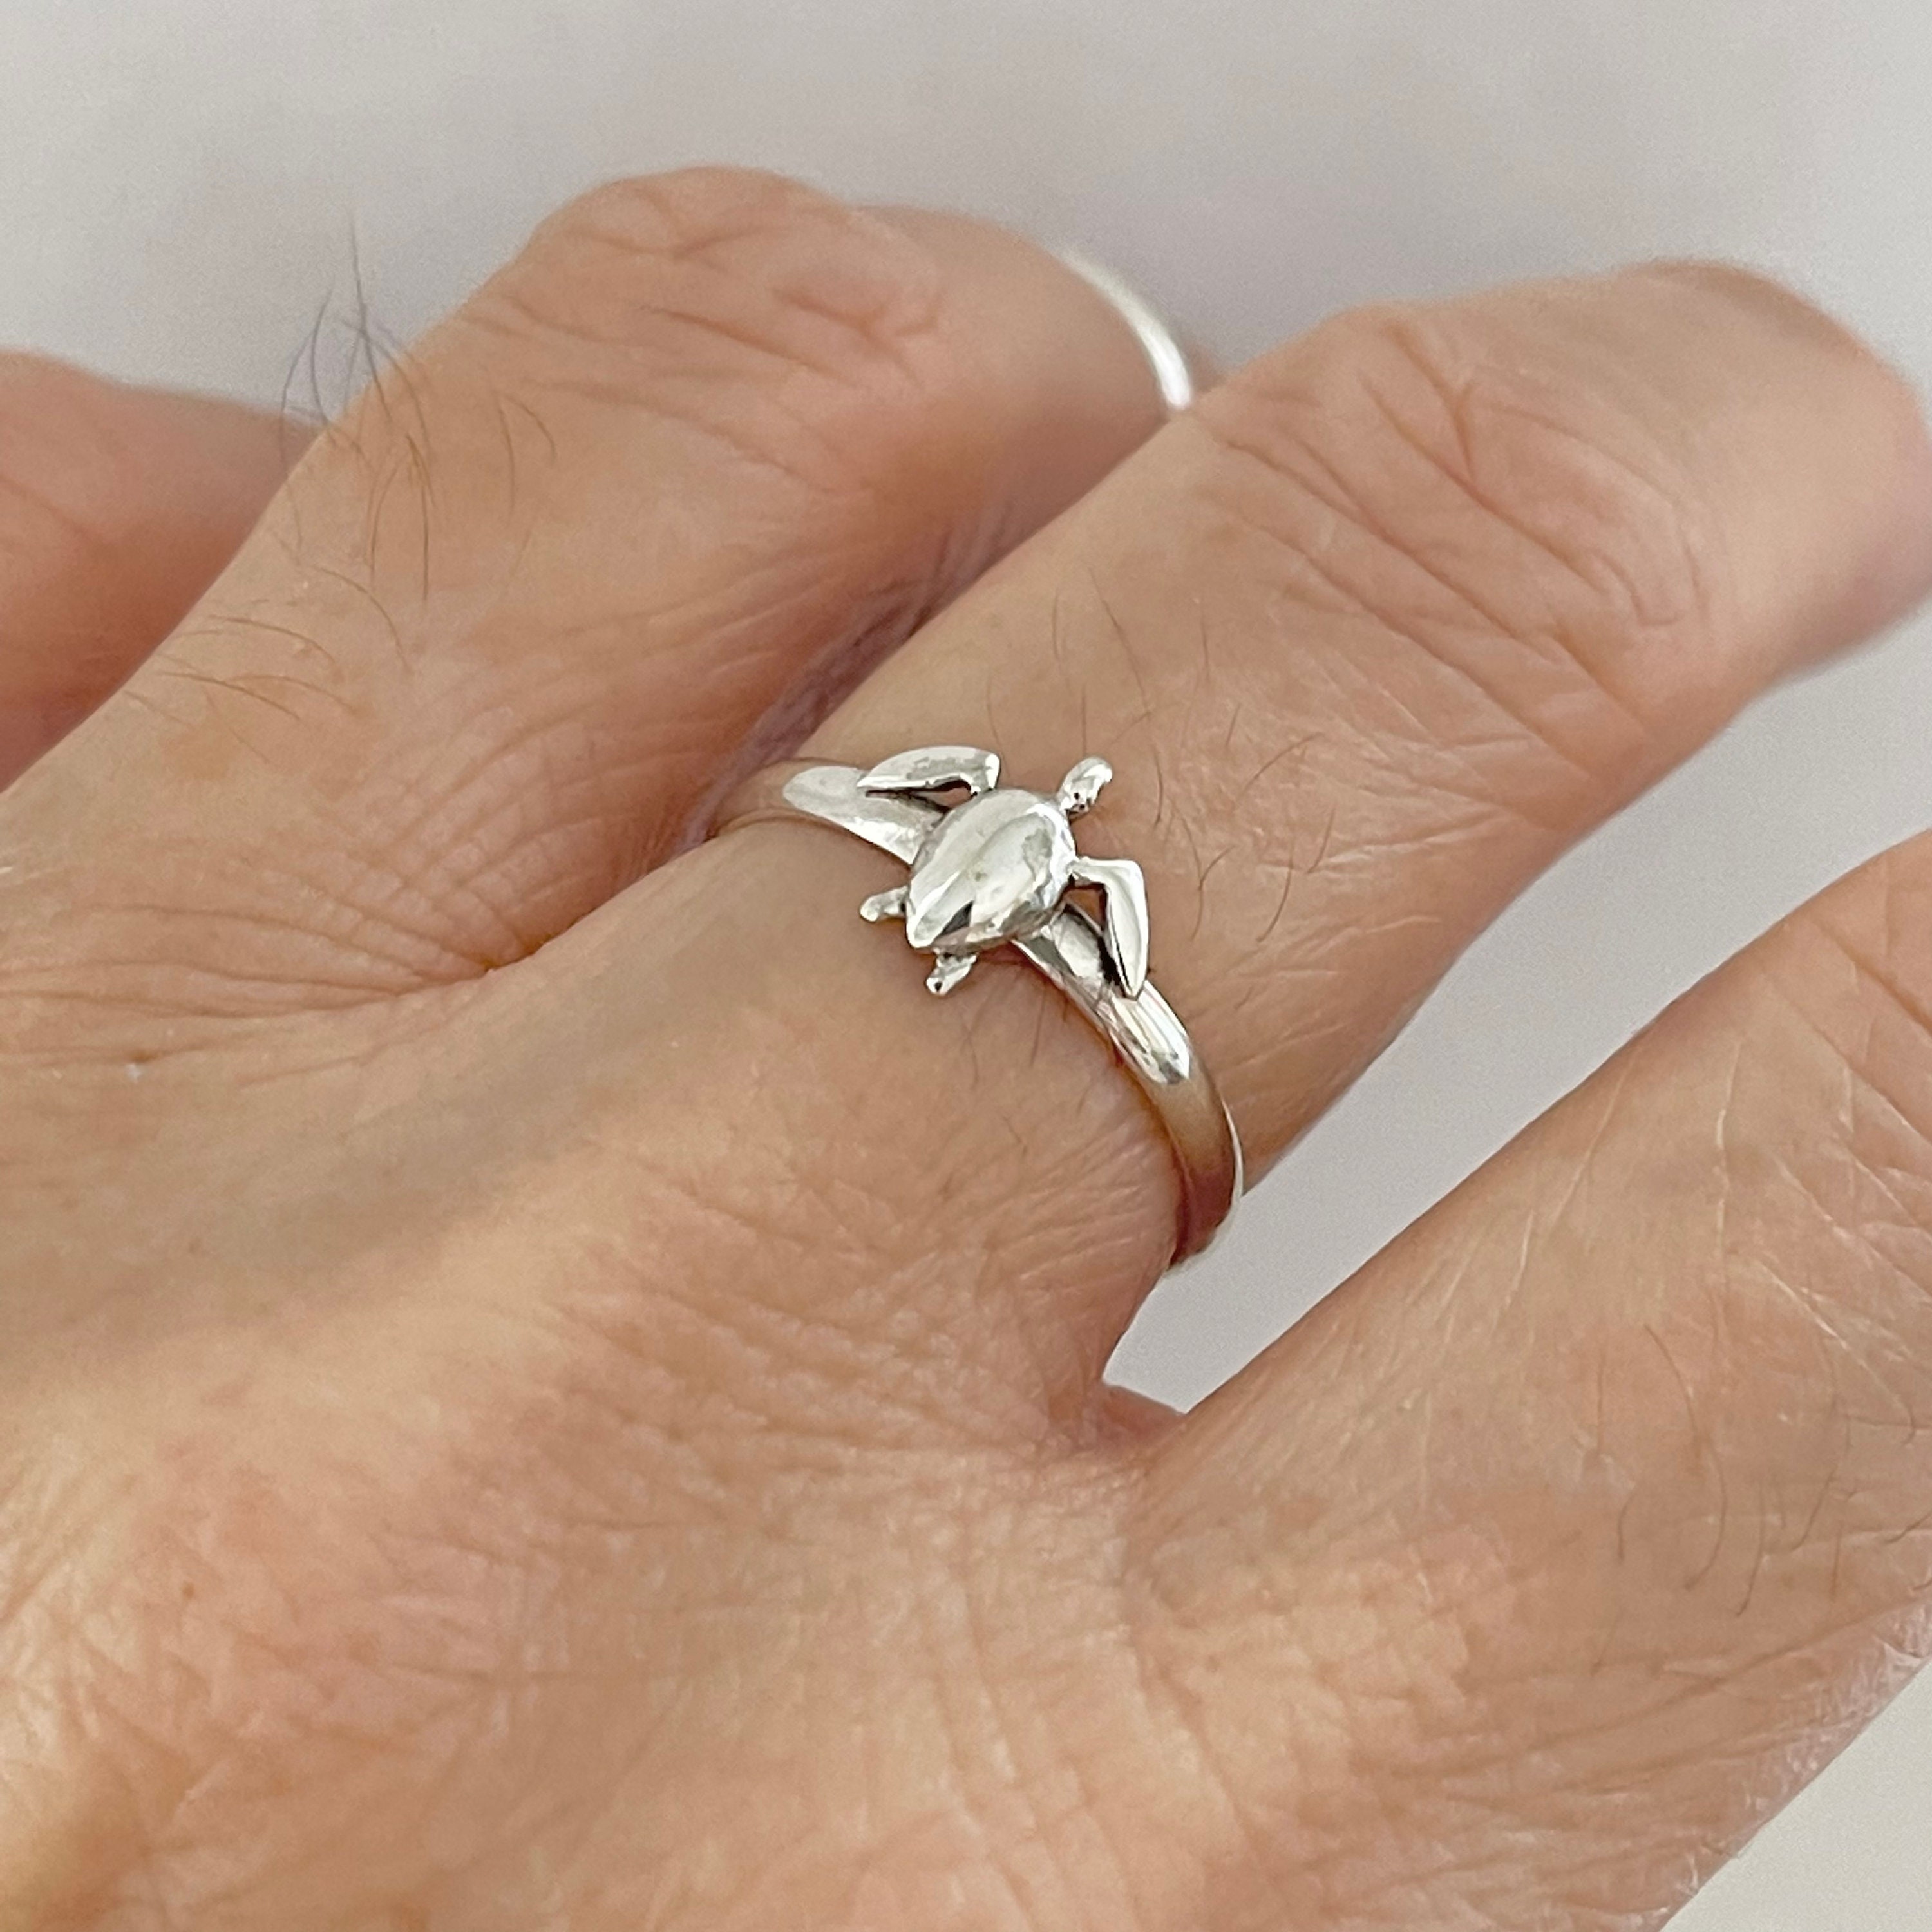 Buy Turtle Ring, Turtle Silver Ring, Stacking Ring, Tortoise Ring, Little Turtle  Ring, Tiny Turtle, Animal Ring, Minimalist Ring, Dainty Ring Online in India  - Etsy